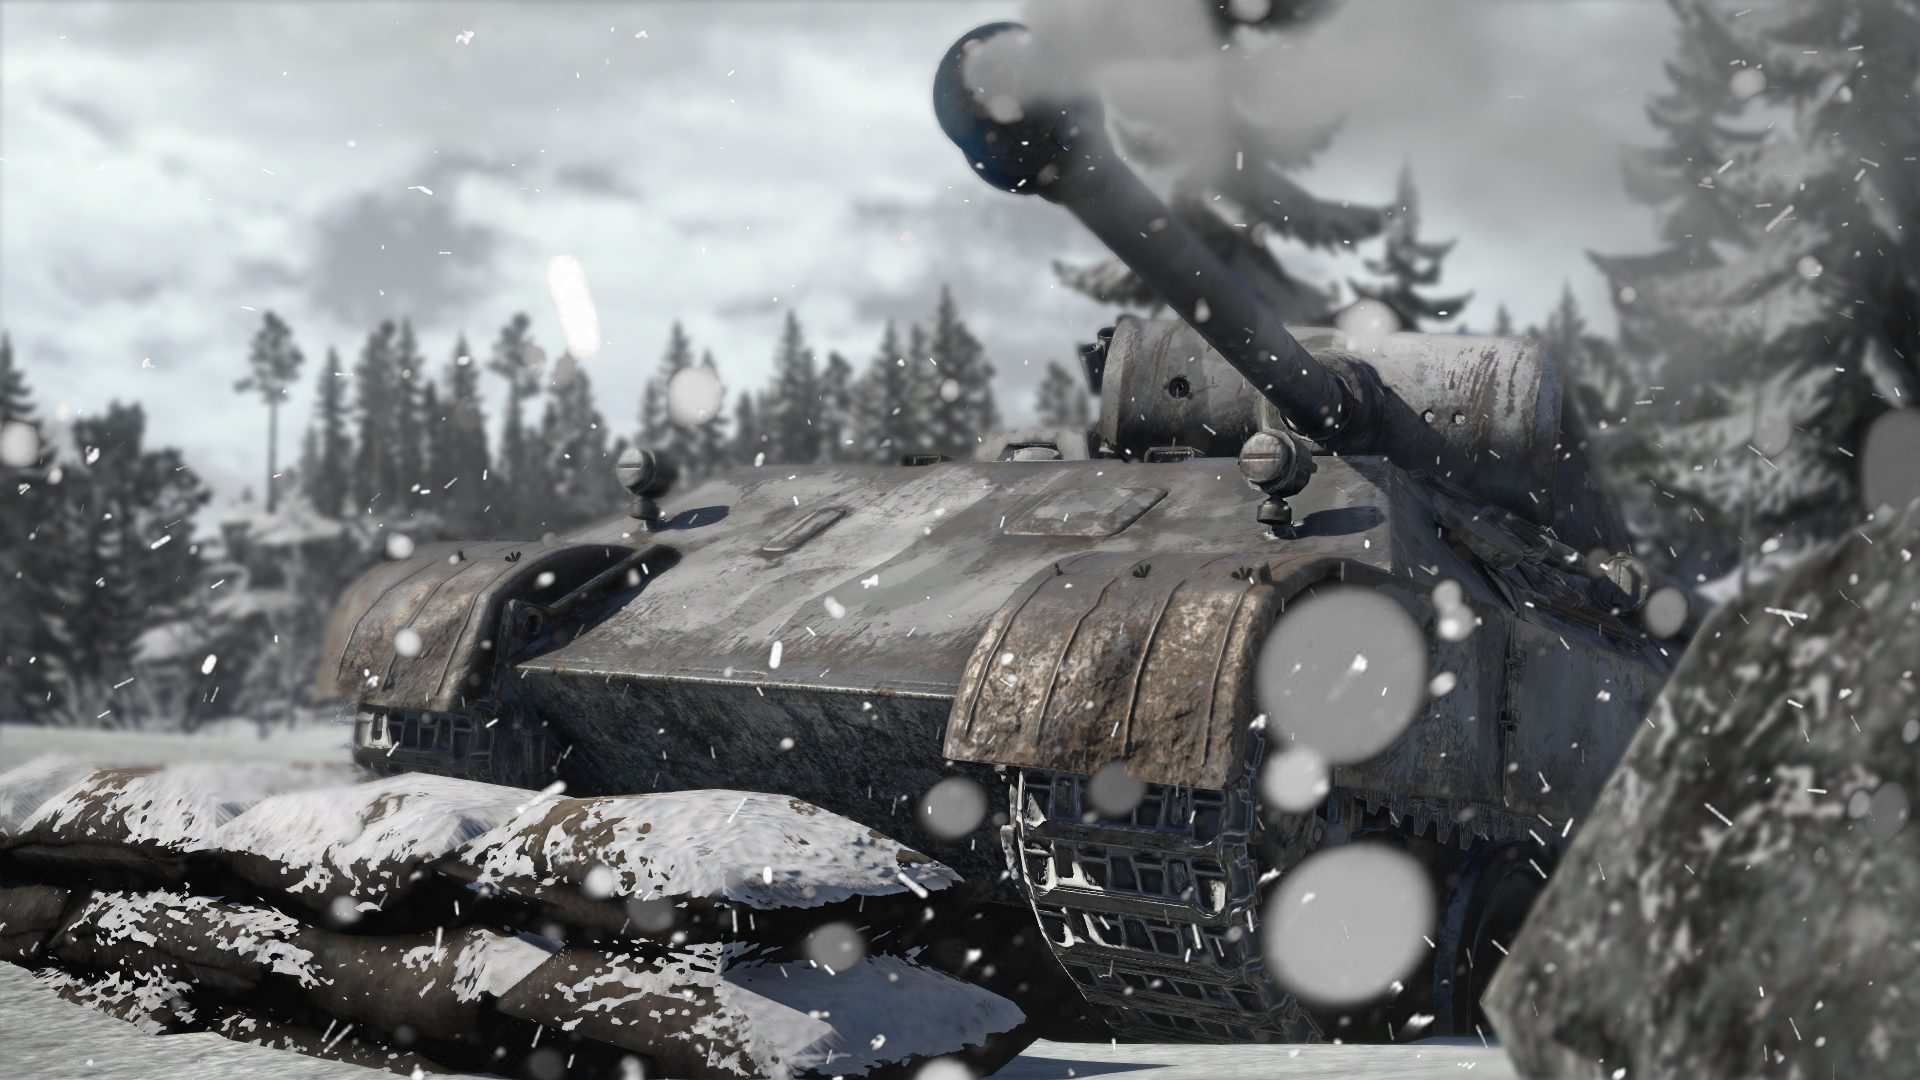 Snowy Panther War Thunder By Billym12345